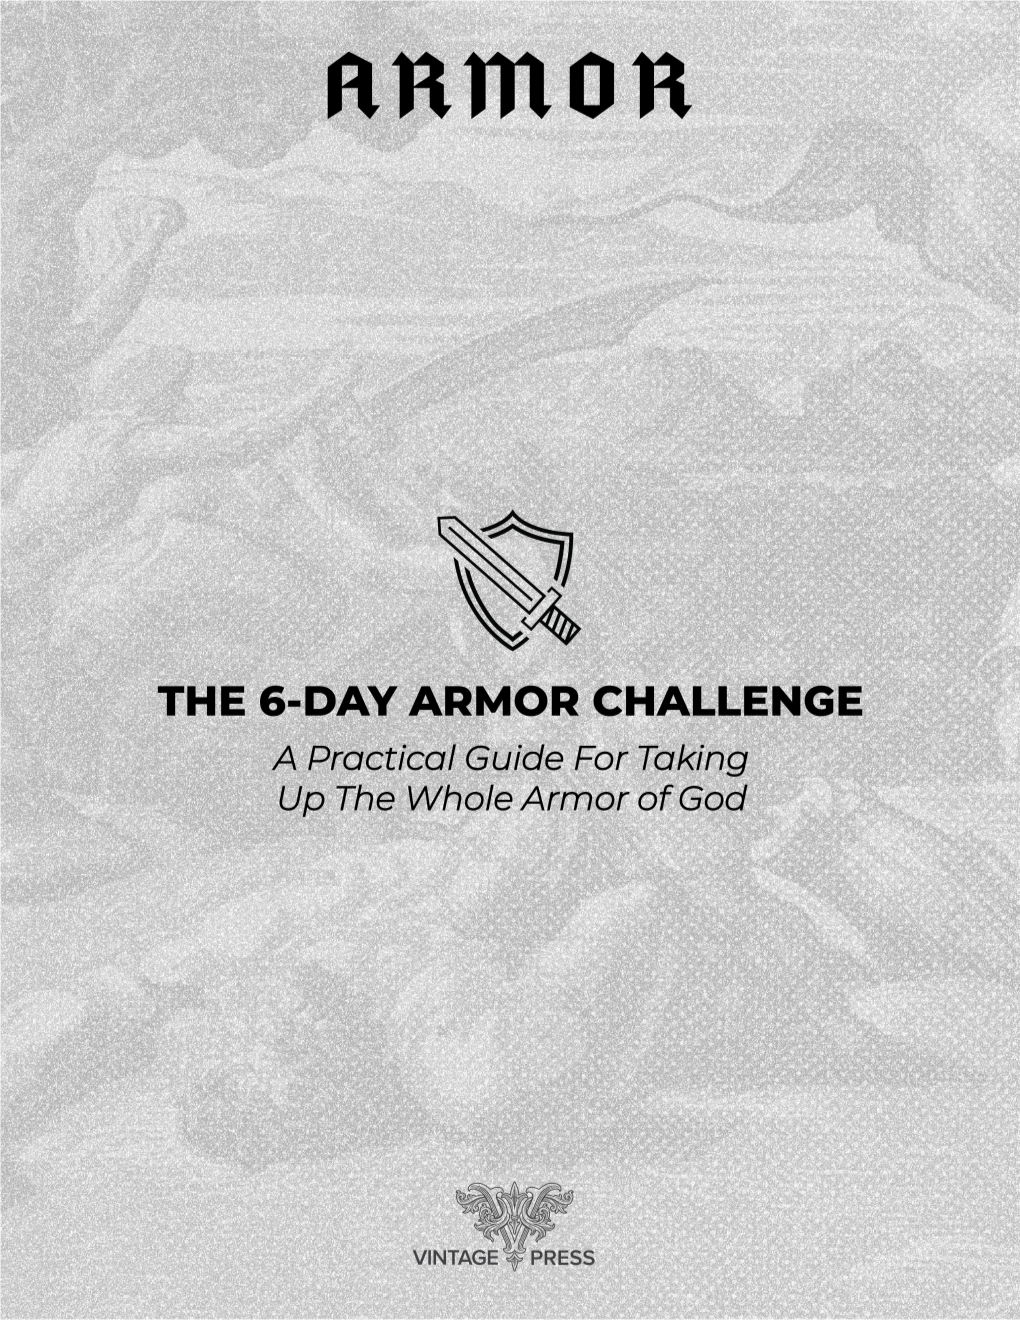 A Practical Guide for Taking up the Whole Armor of God